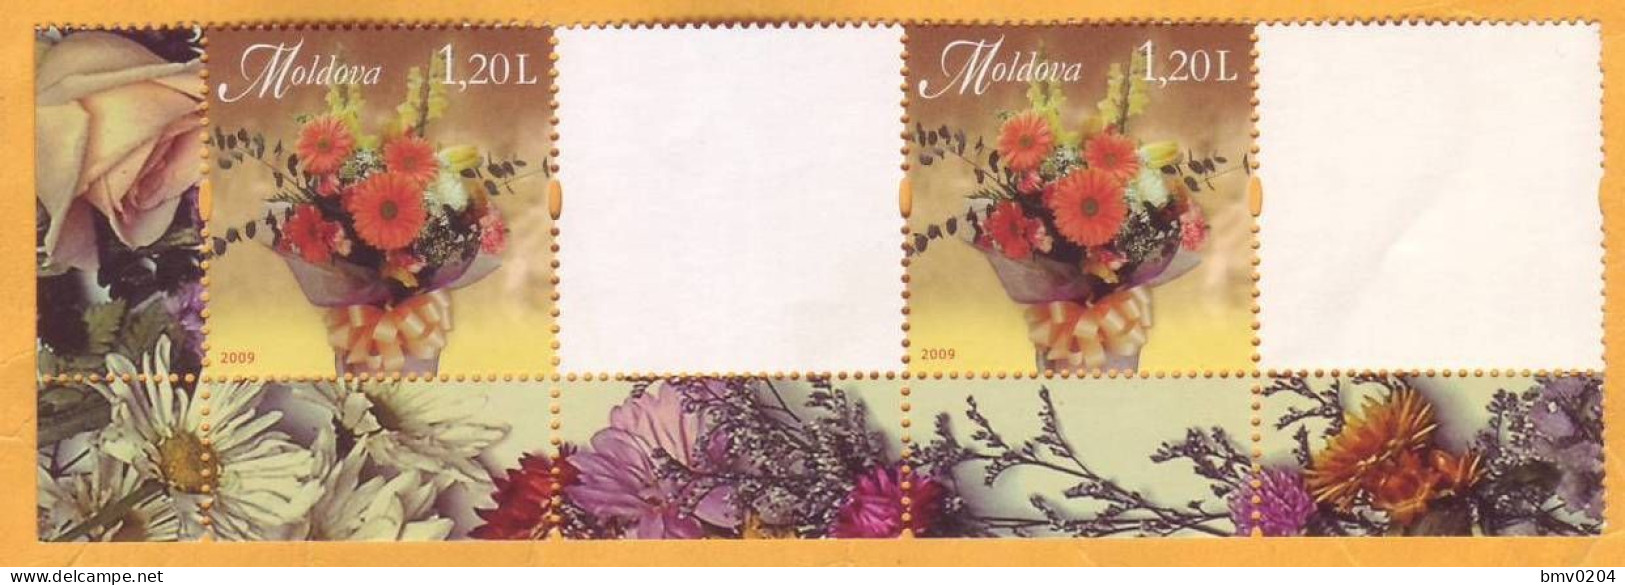 2009 2013 Moldova Personalized Postage Stamps, Issue 1.  SAMPLES. Wildflowers  2v  Mint - Moldavia